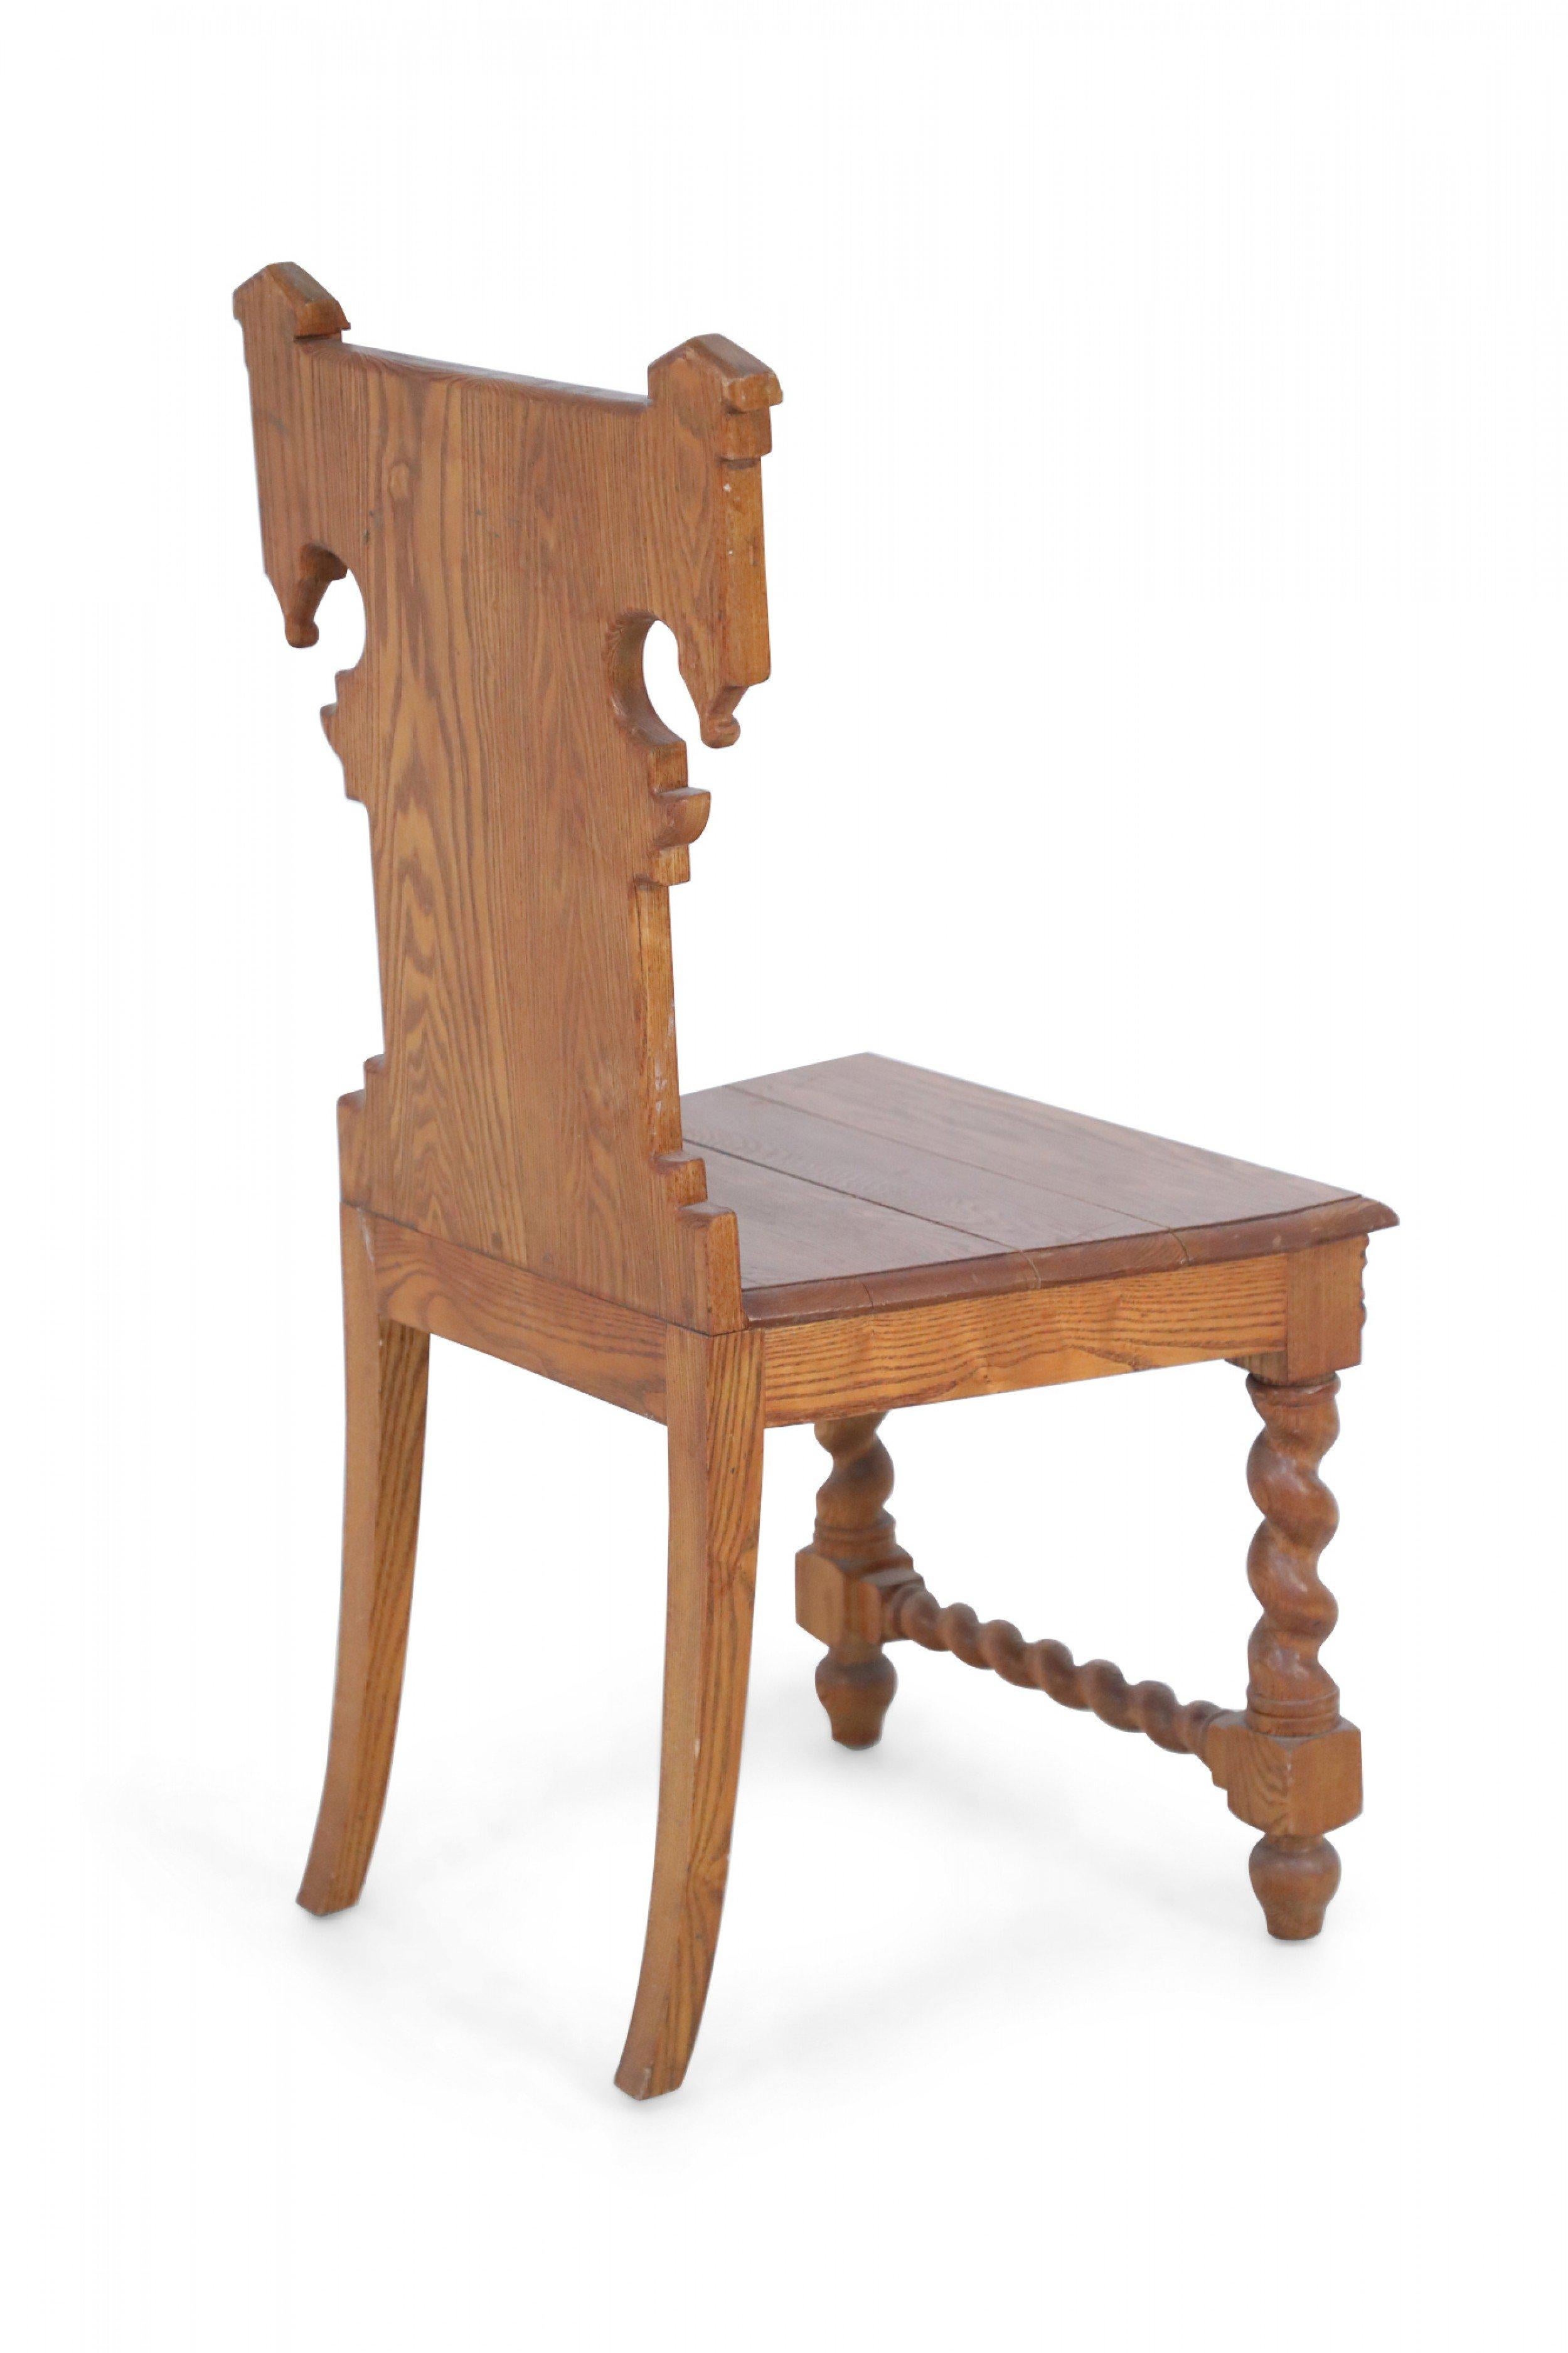 Italian Renaissance Carved Wooden Turn-Legged Side Chair In Good Condition For Sale In New York, NY